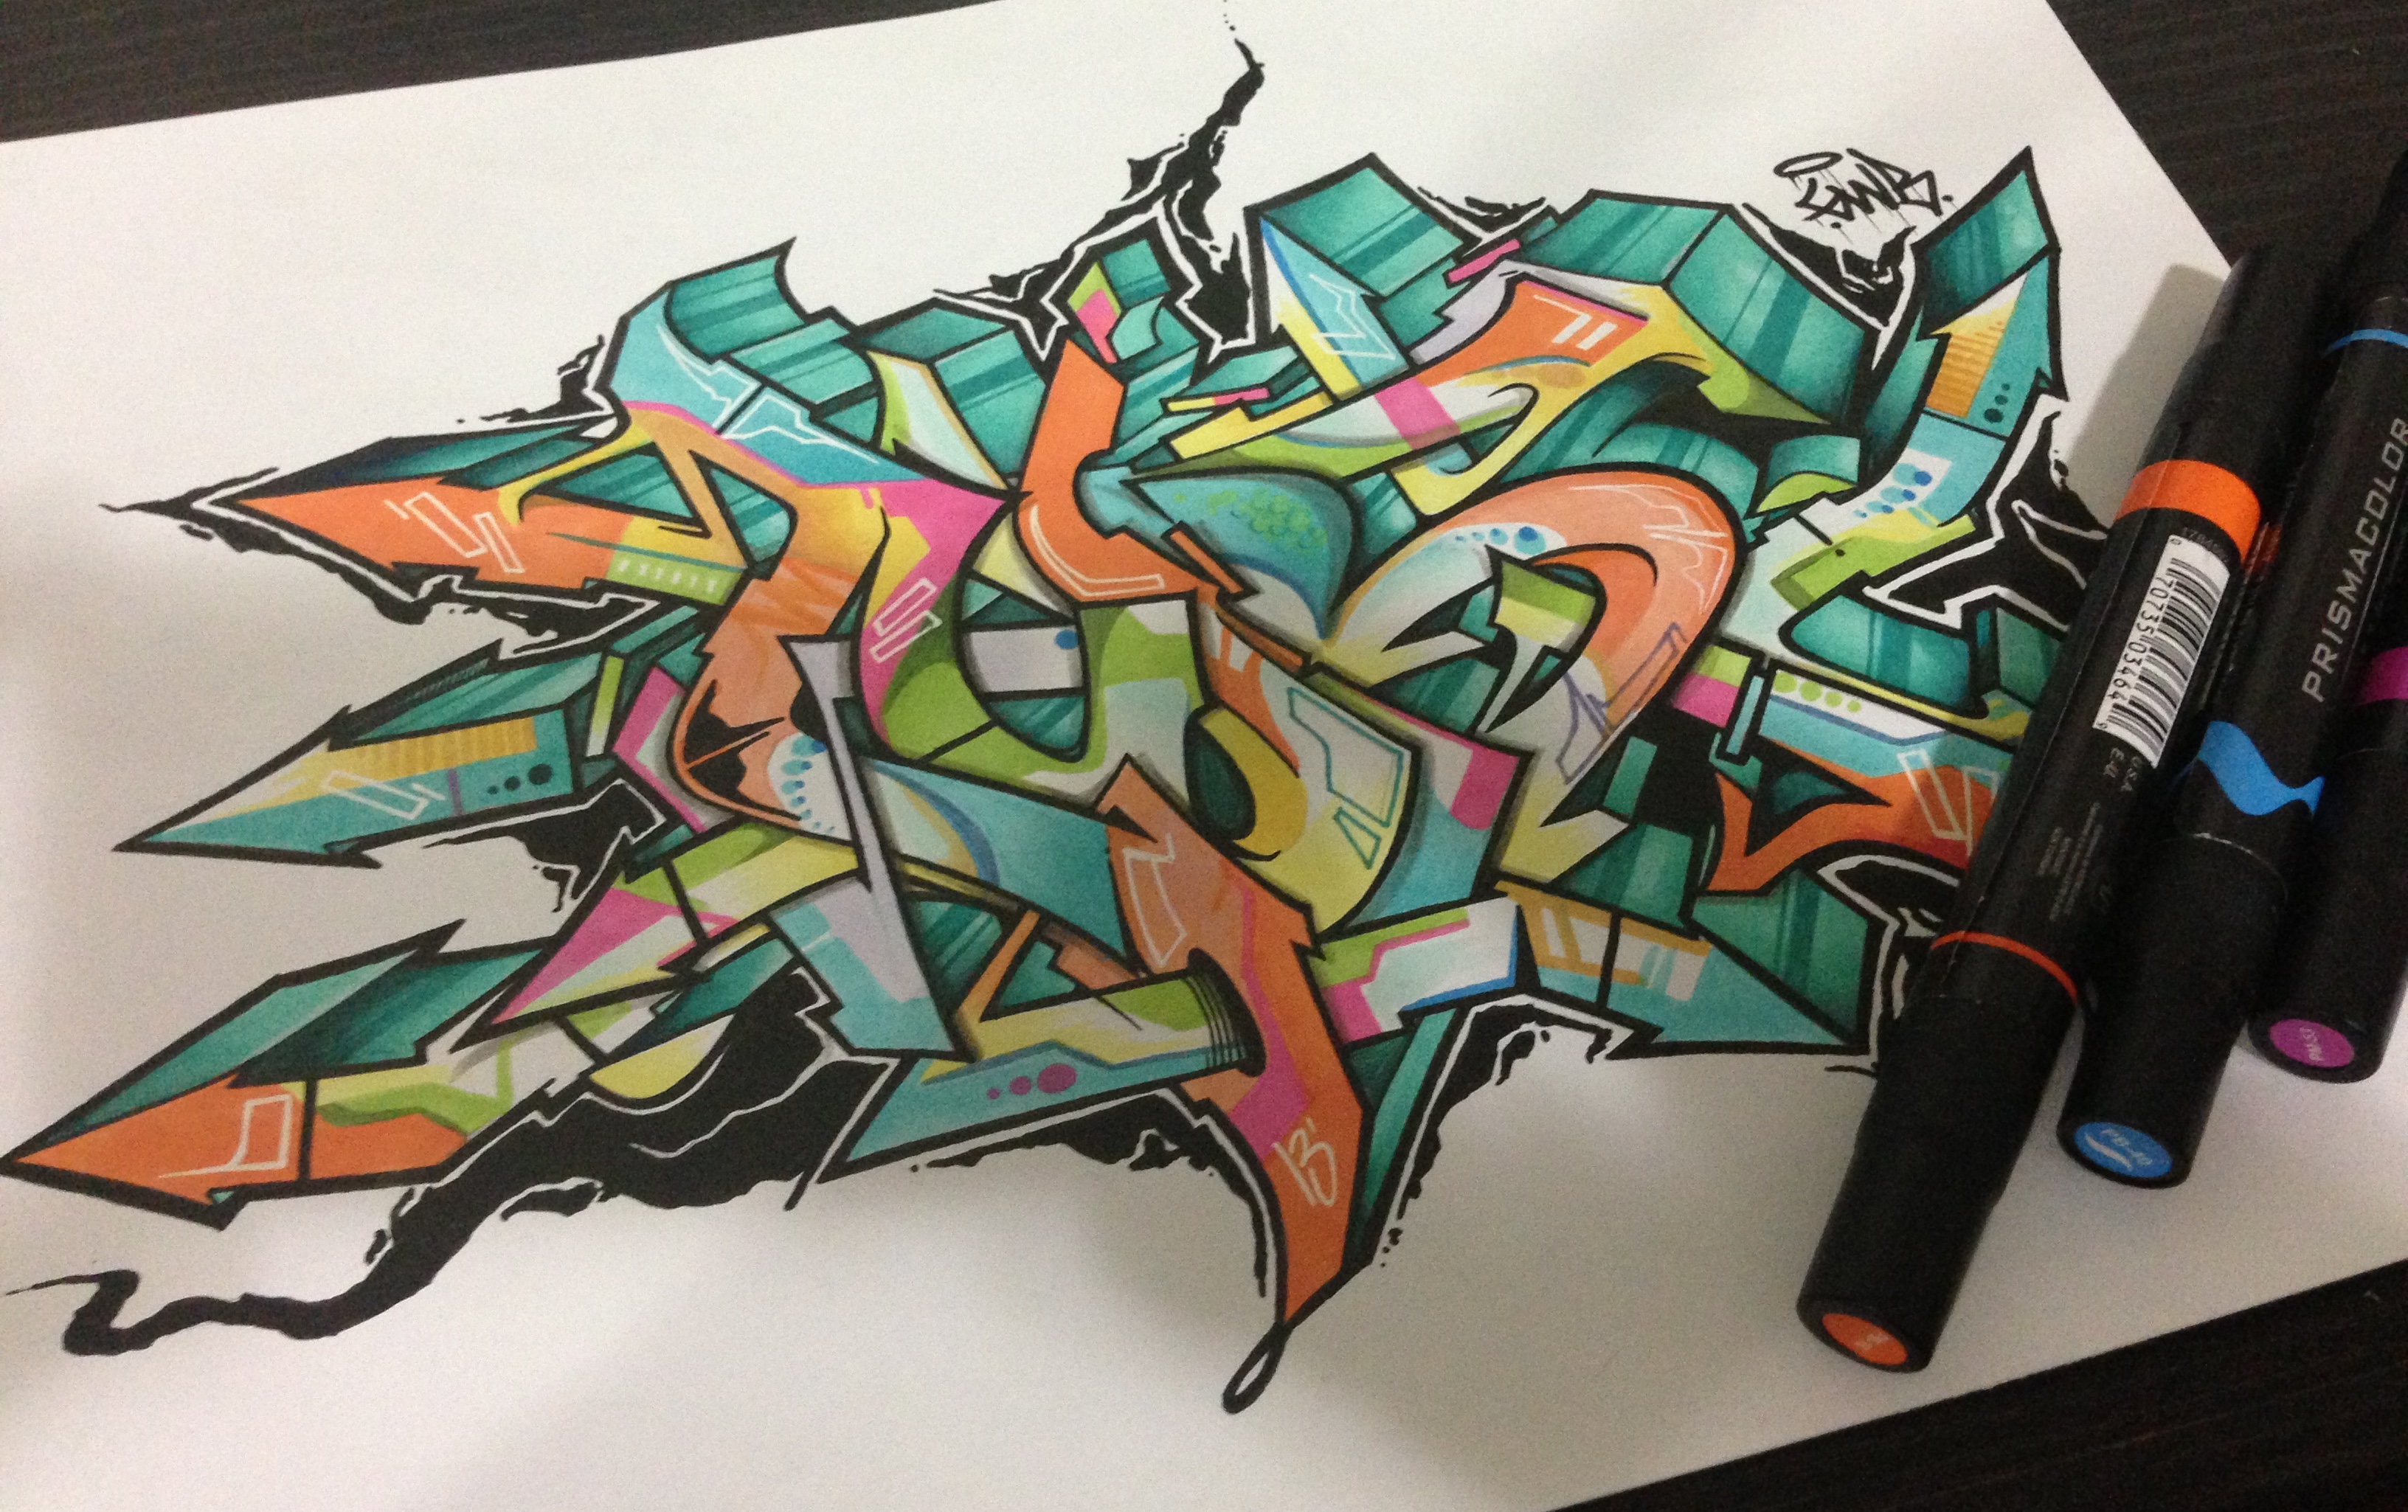 AOB by Nover, markers on paper, 2014.